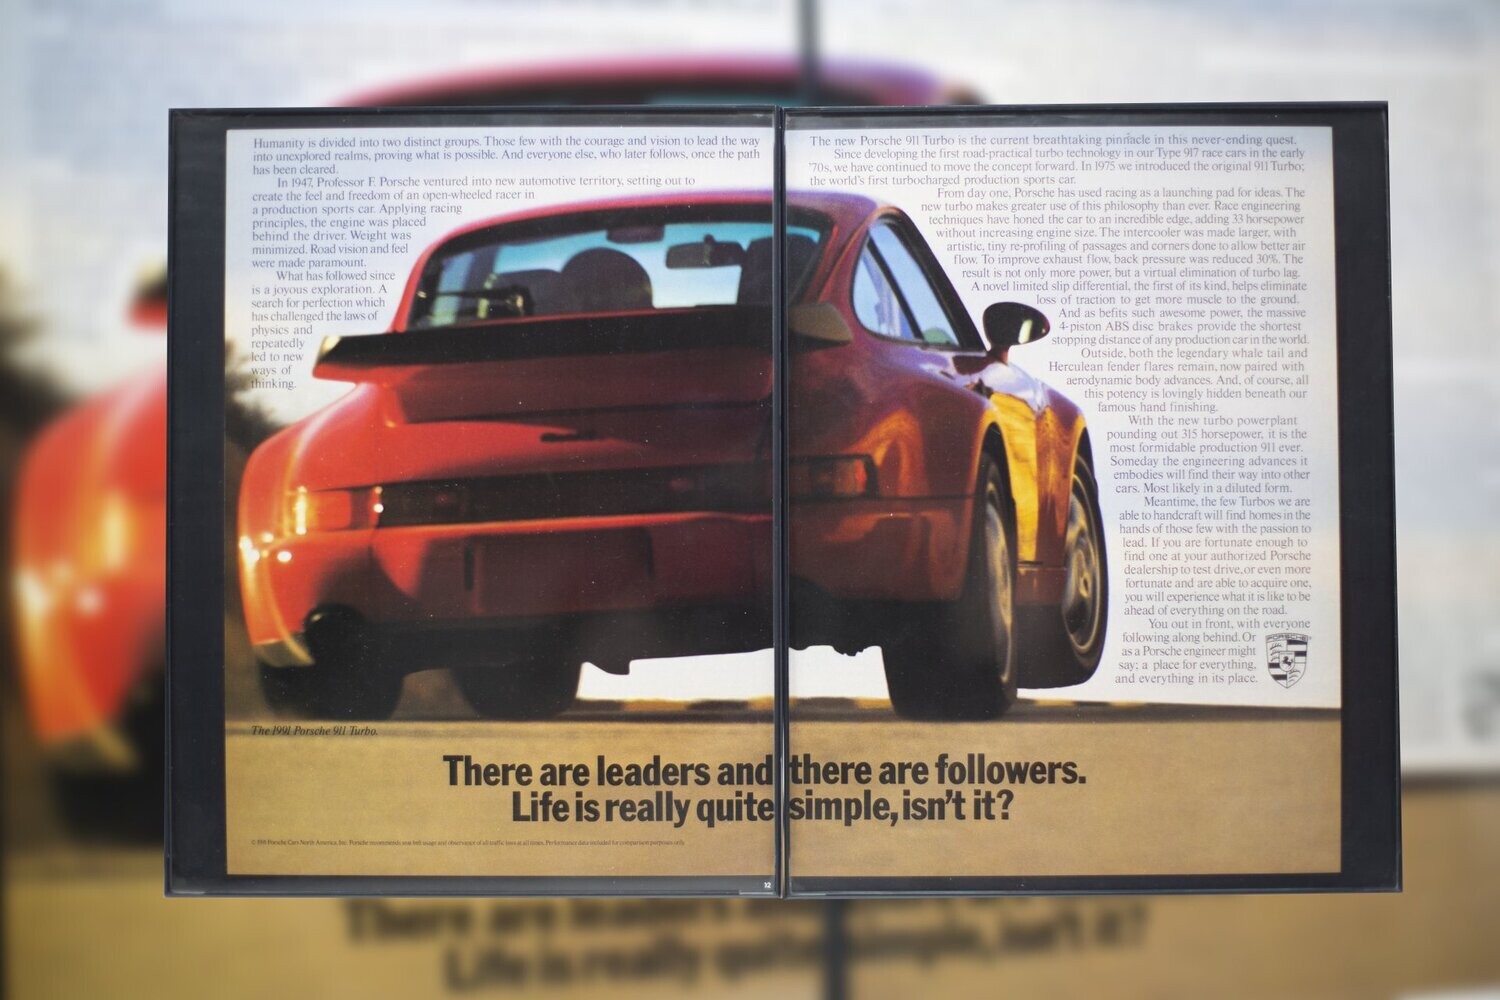 964 Porsche 911 Turbo - Leaders and Followers | Type Schrift.